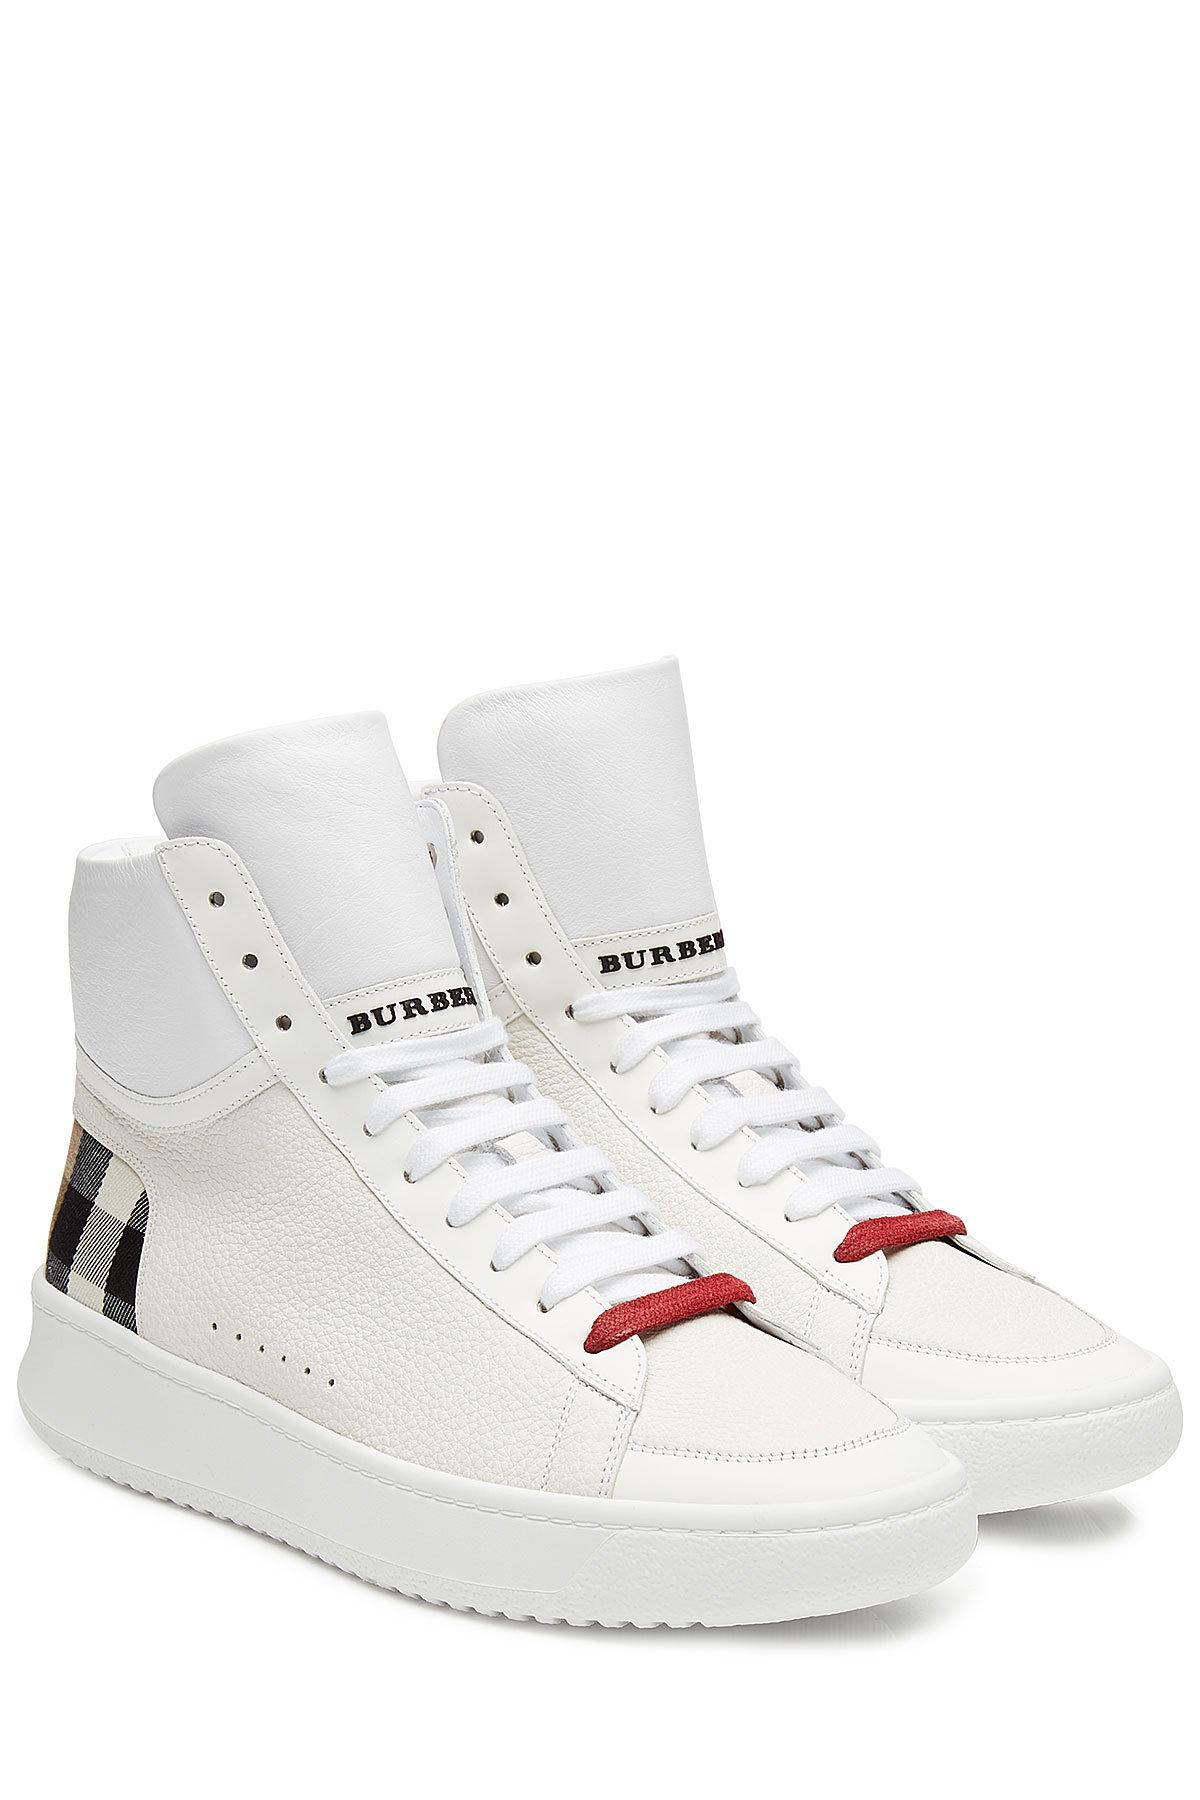 Burberry Leather High Top Sneakers for Men | Lyst